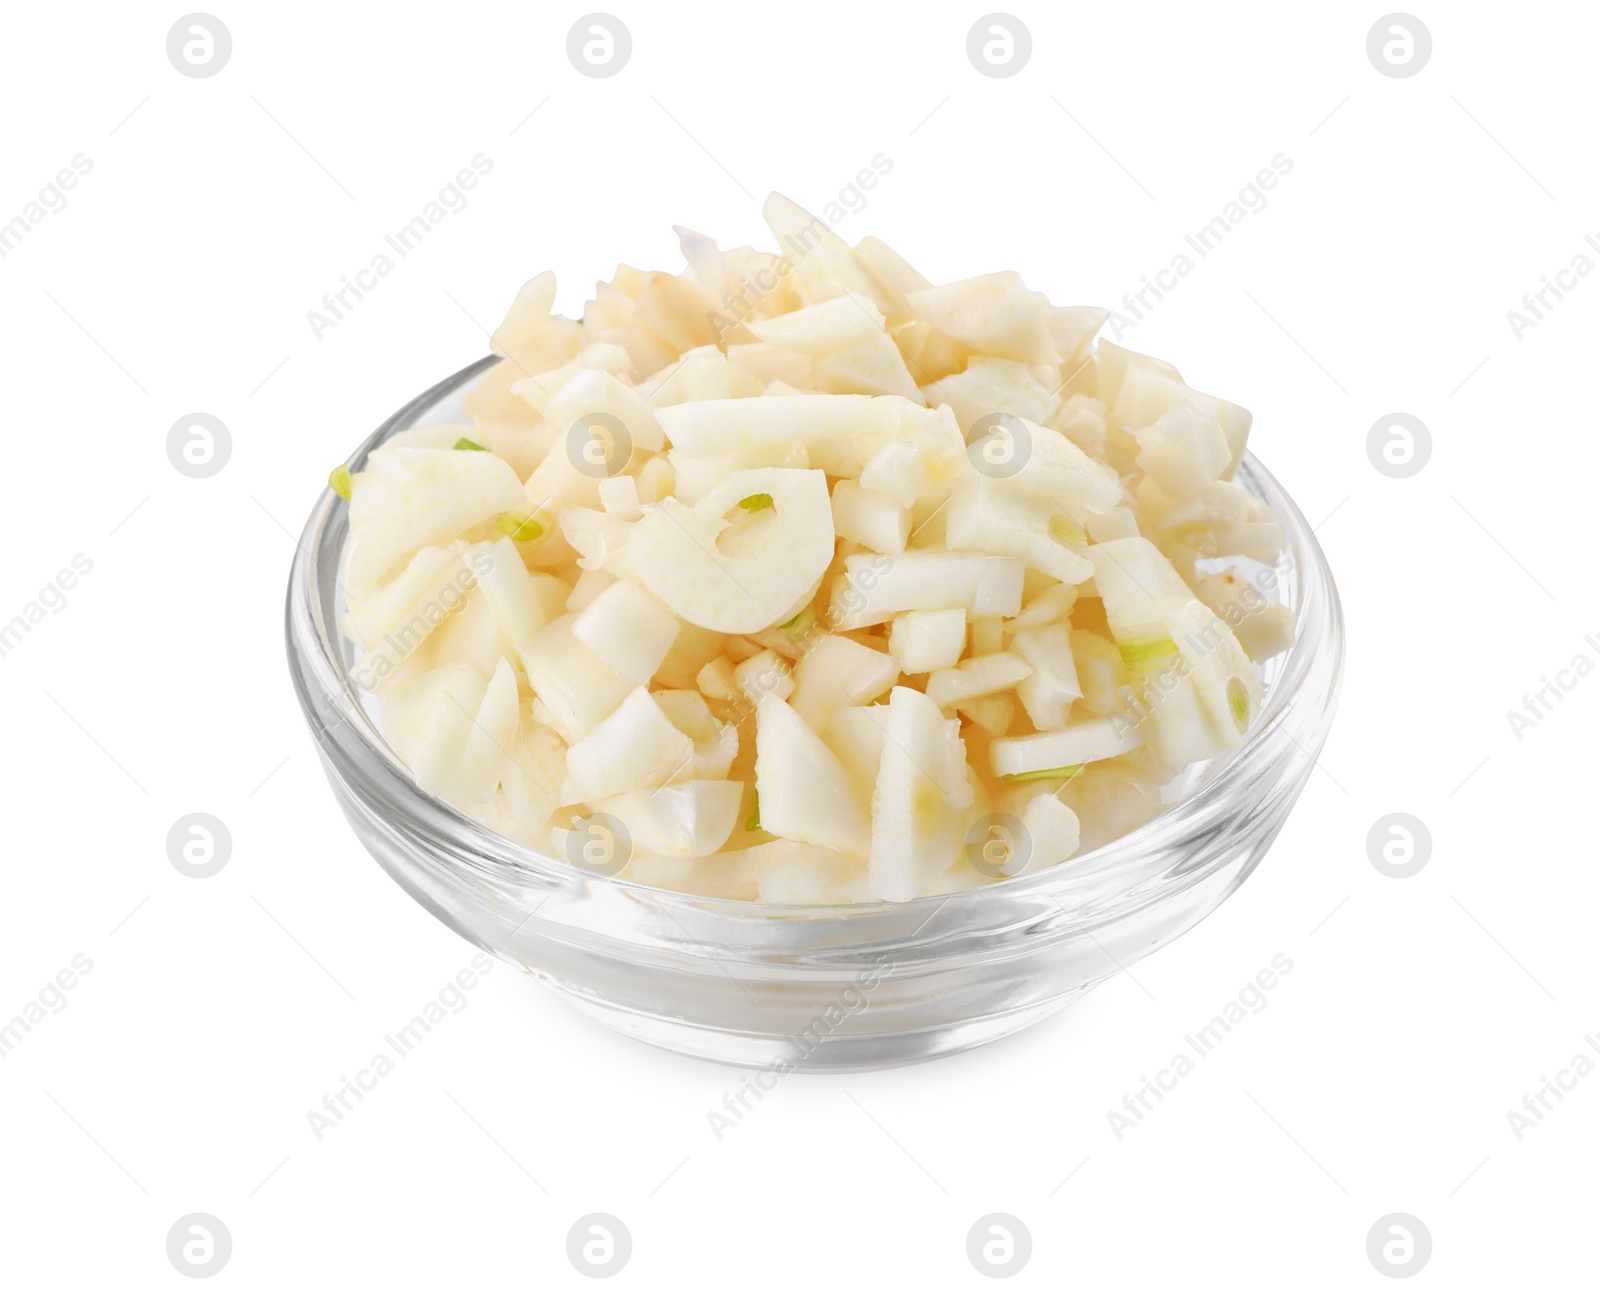 Photo of Pieces of fresh garlic in bowl isolated on white